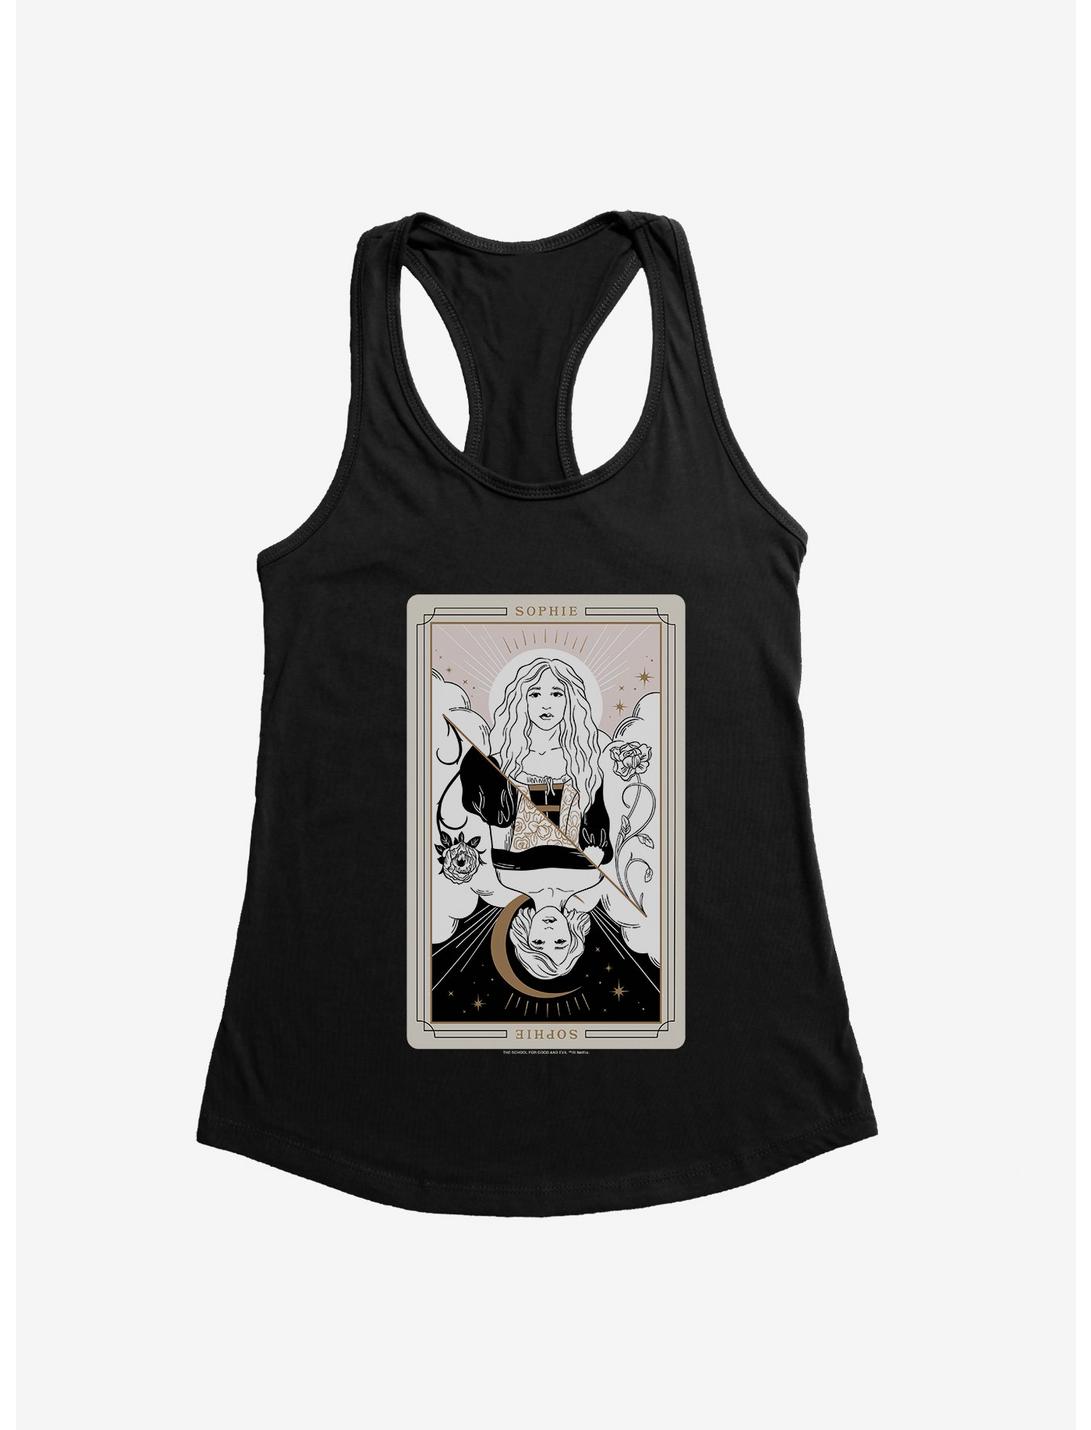 The School For Good And Evil Sophie Tarot Card Womens Tank Top, BLACK, hi-res